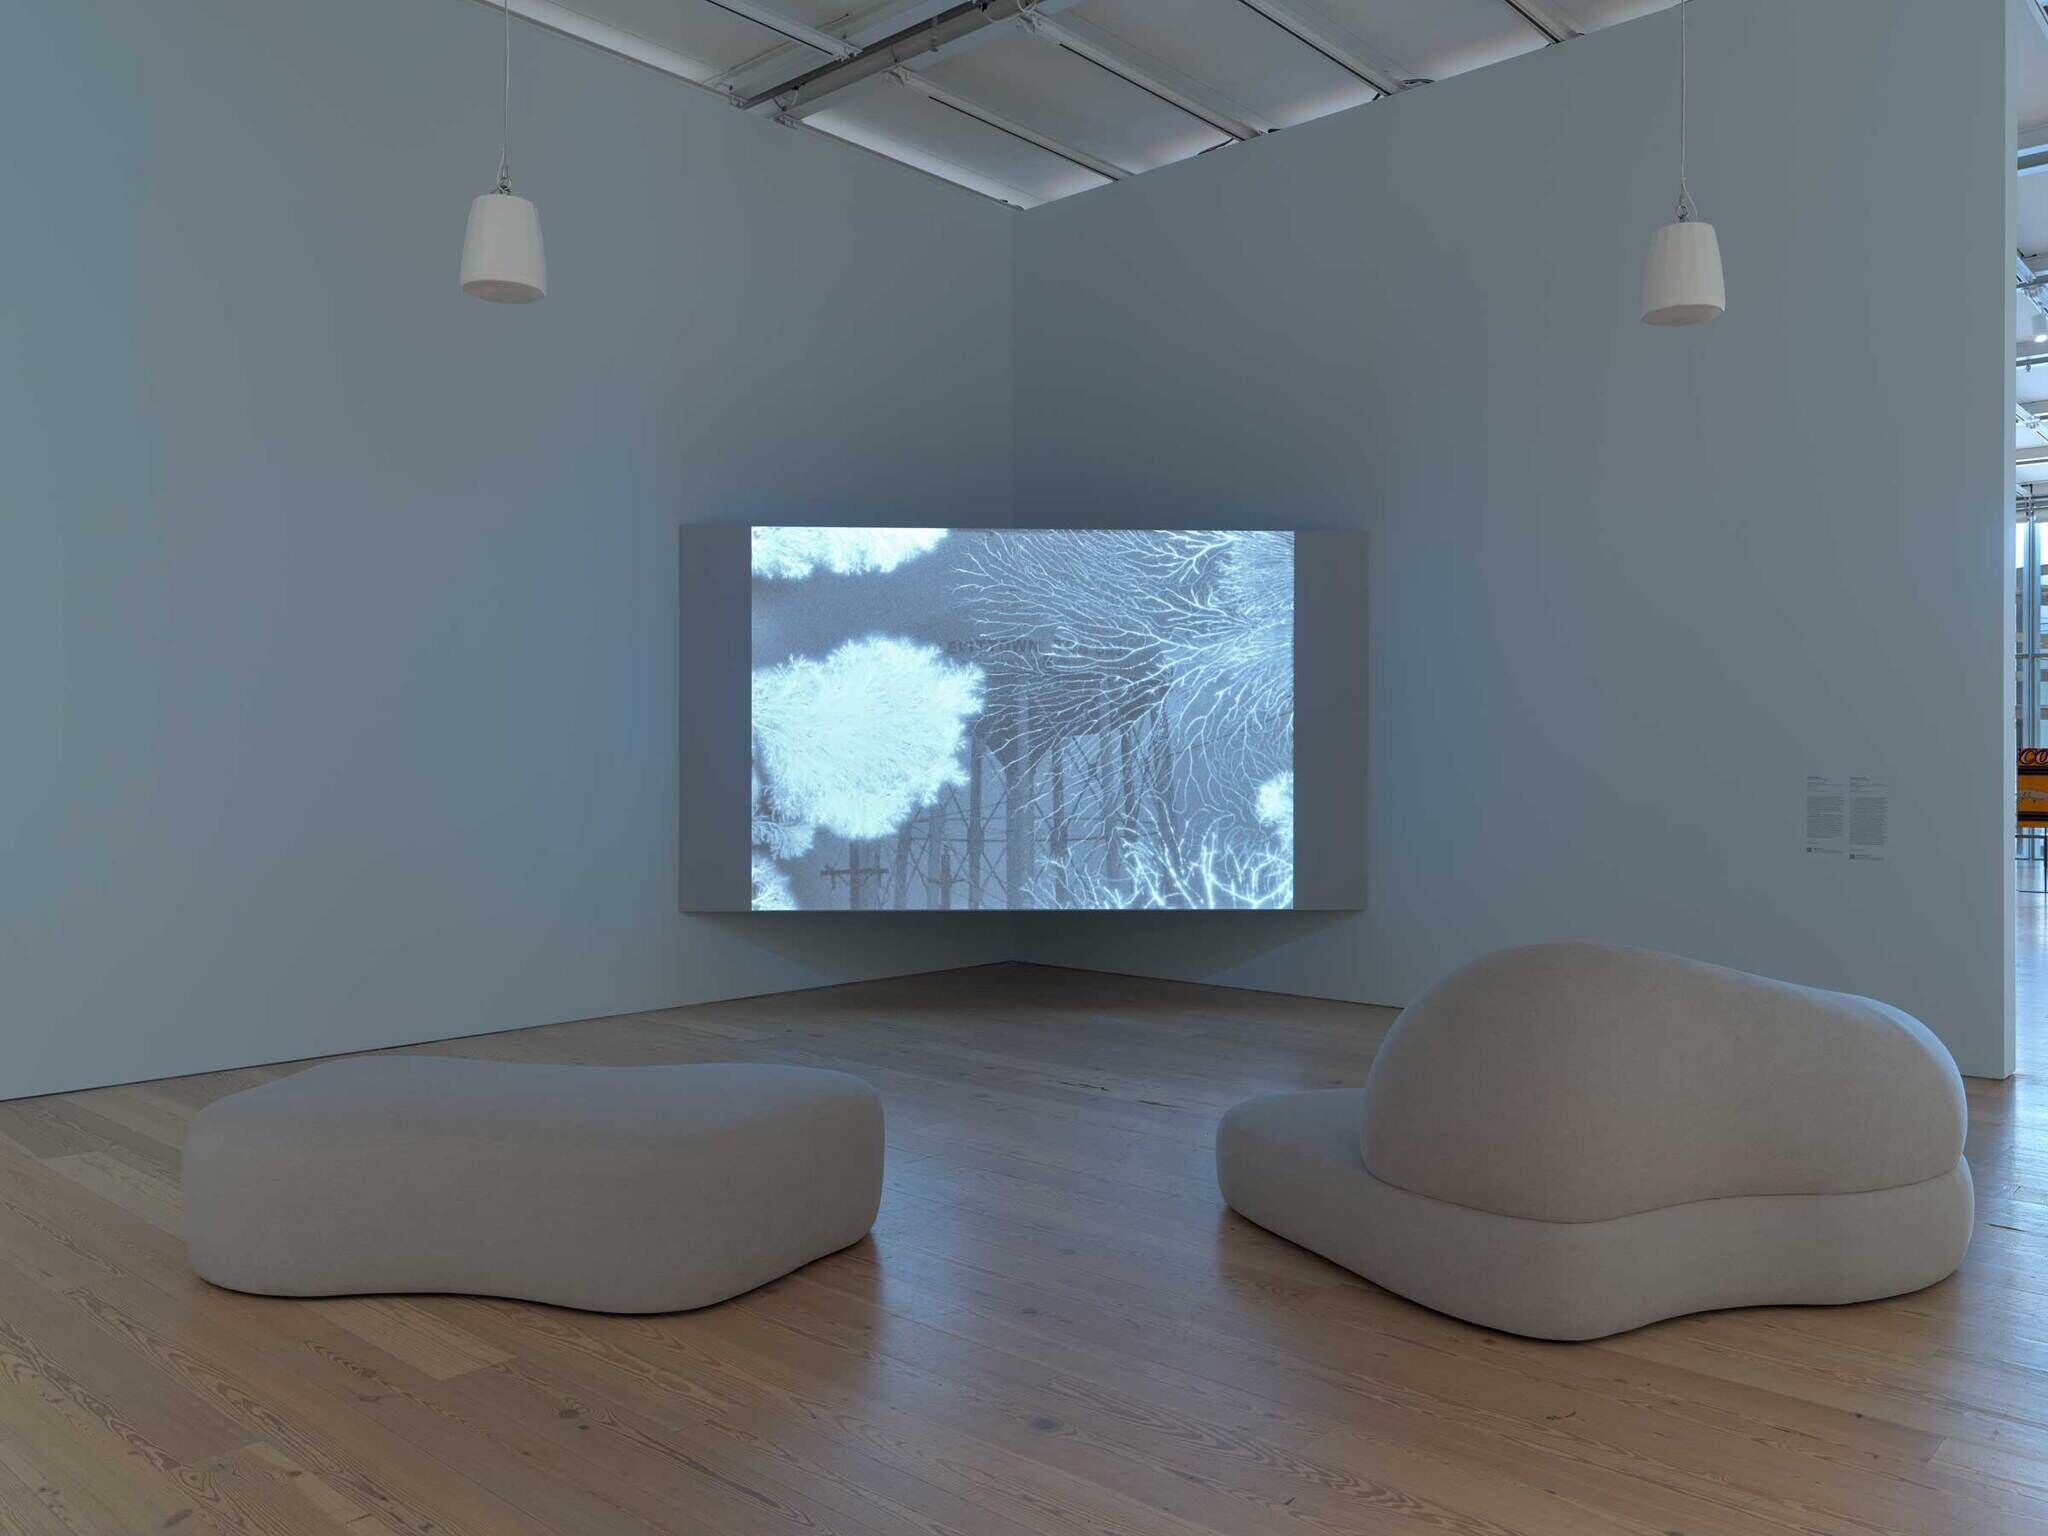 Two small white couches facing a projector with a black and white image of leaves.